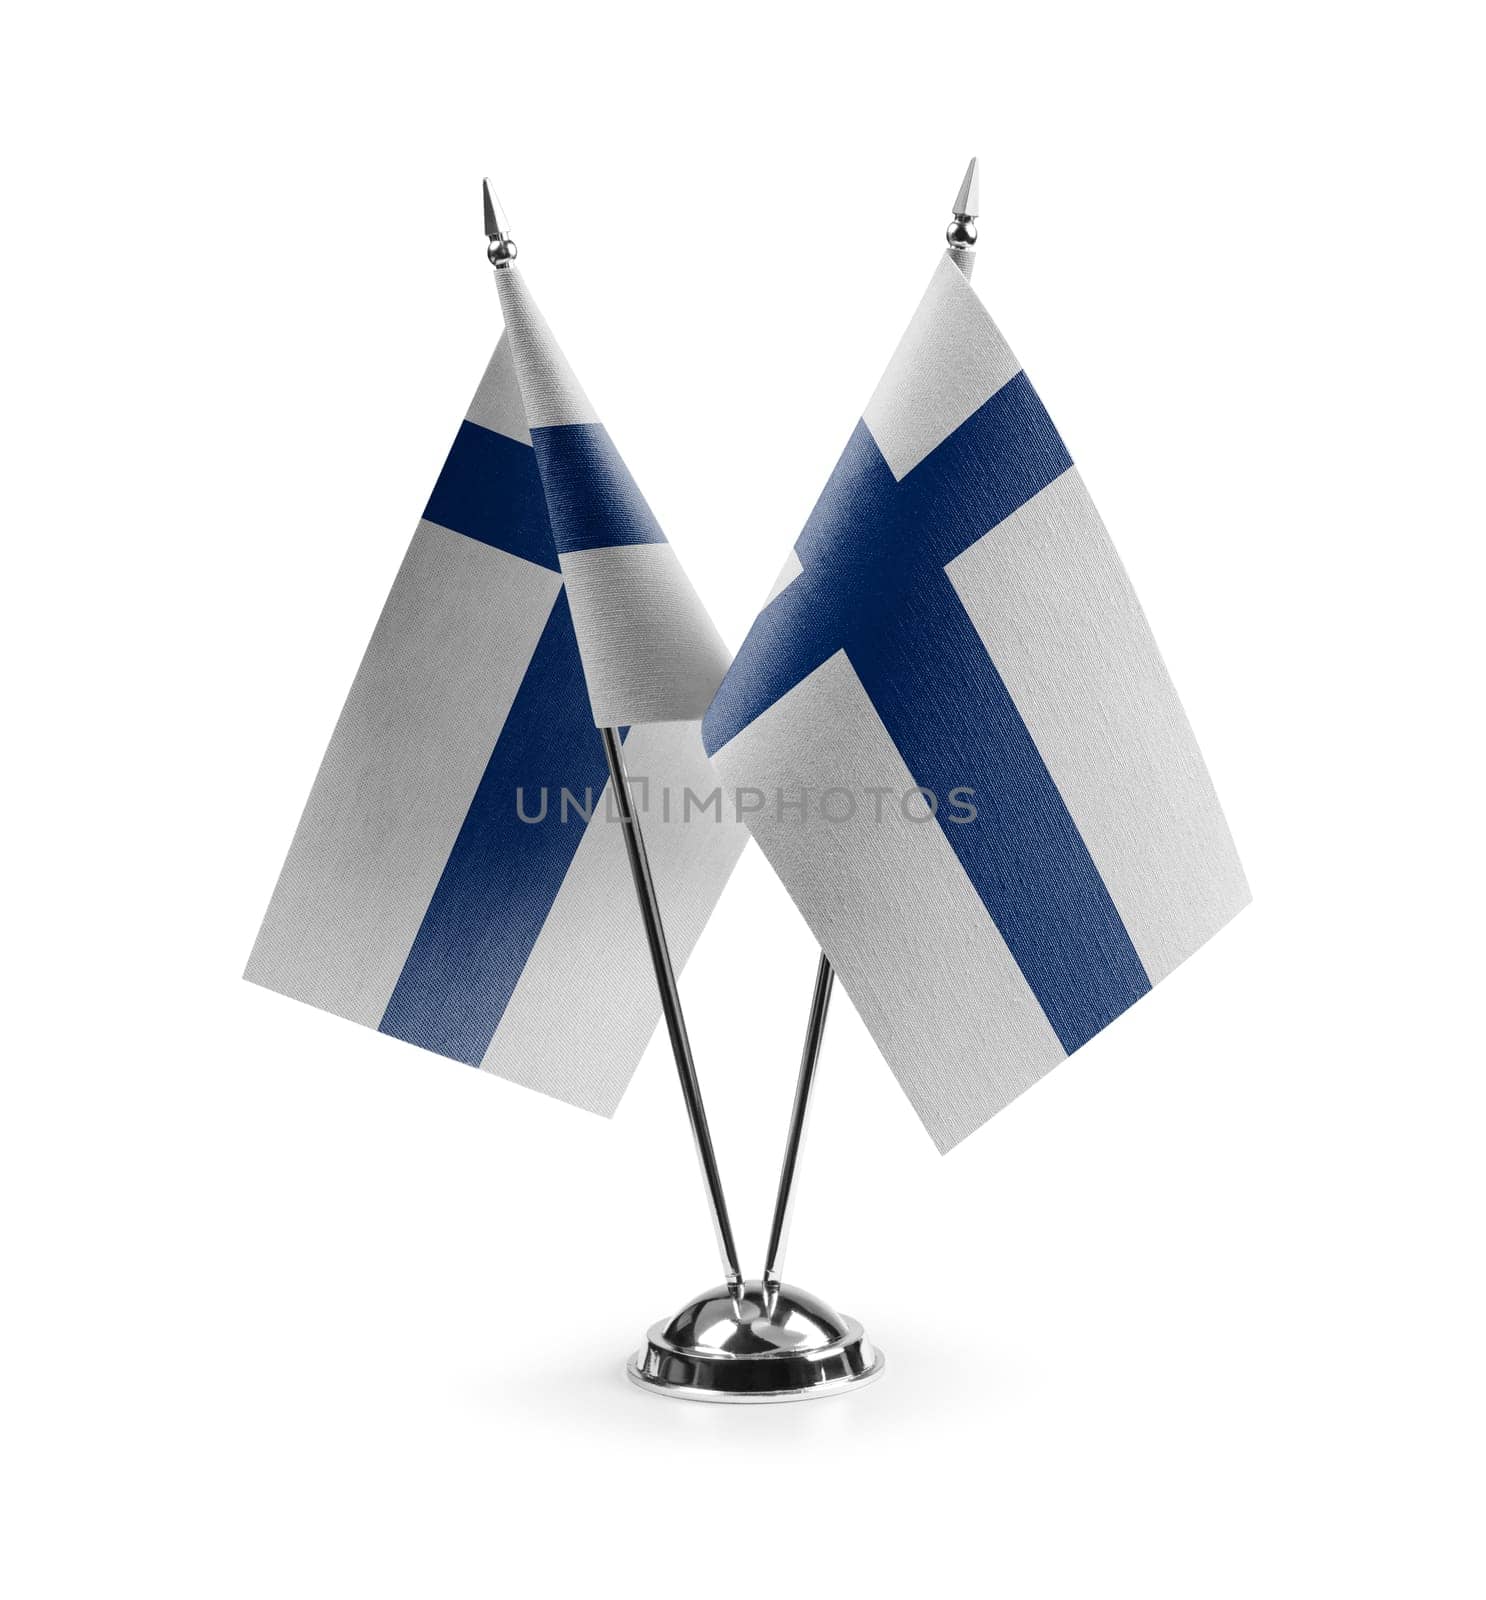 Small national flags of the Finland on a white background by butenkow